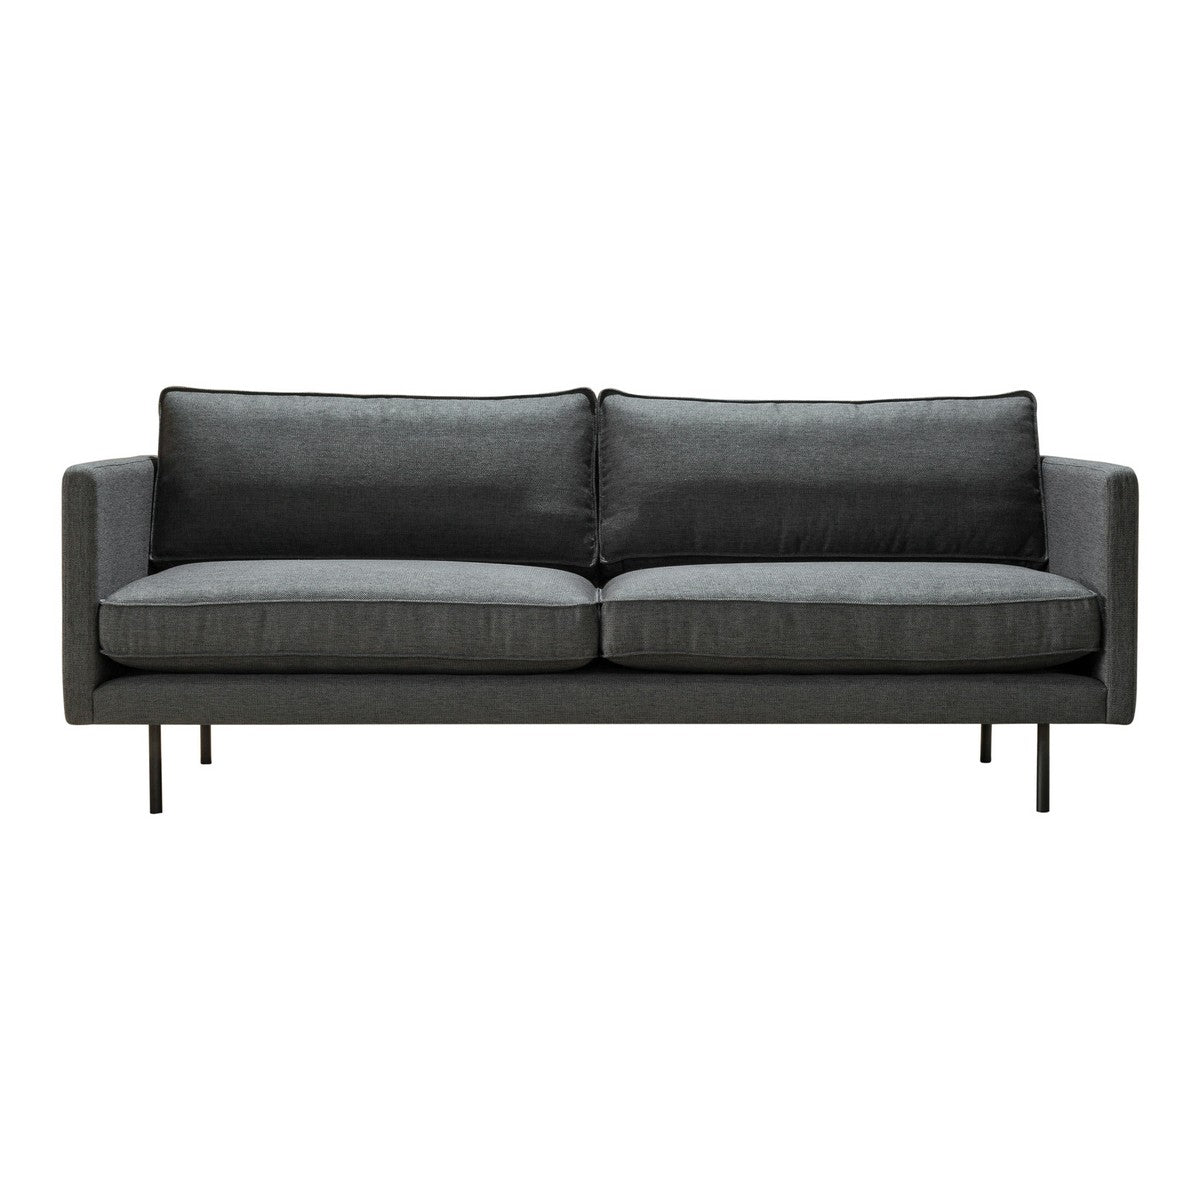 Moe's Home Collection Raphael Sofa Anthracite - WB-1002-07 - Moe's Home Collection - Sofas - Minimal And Modern - 1